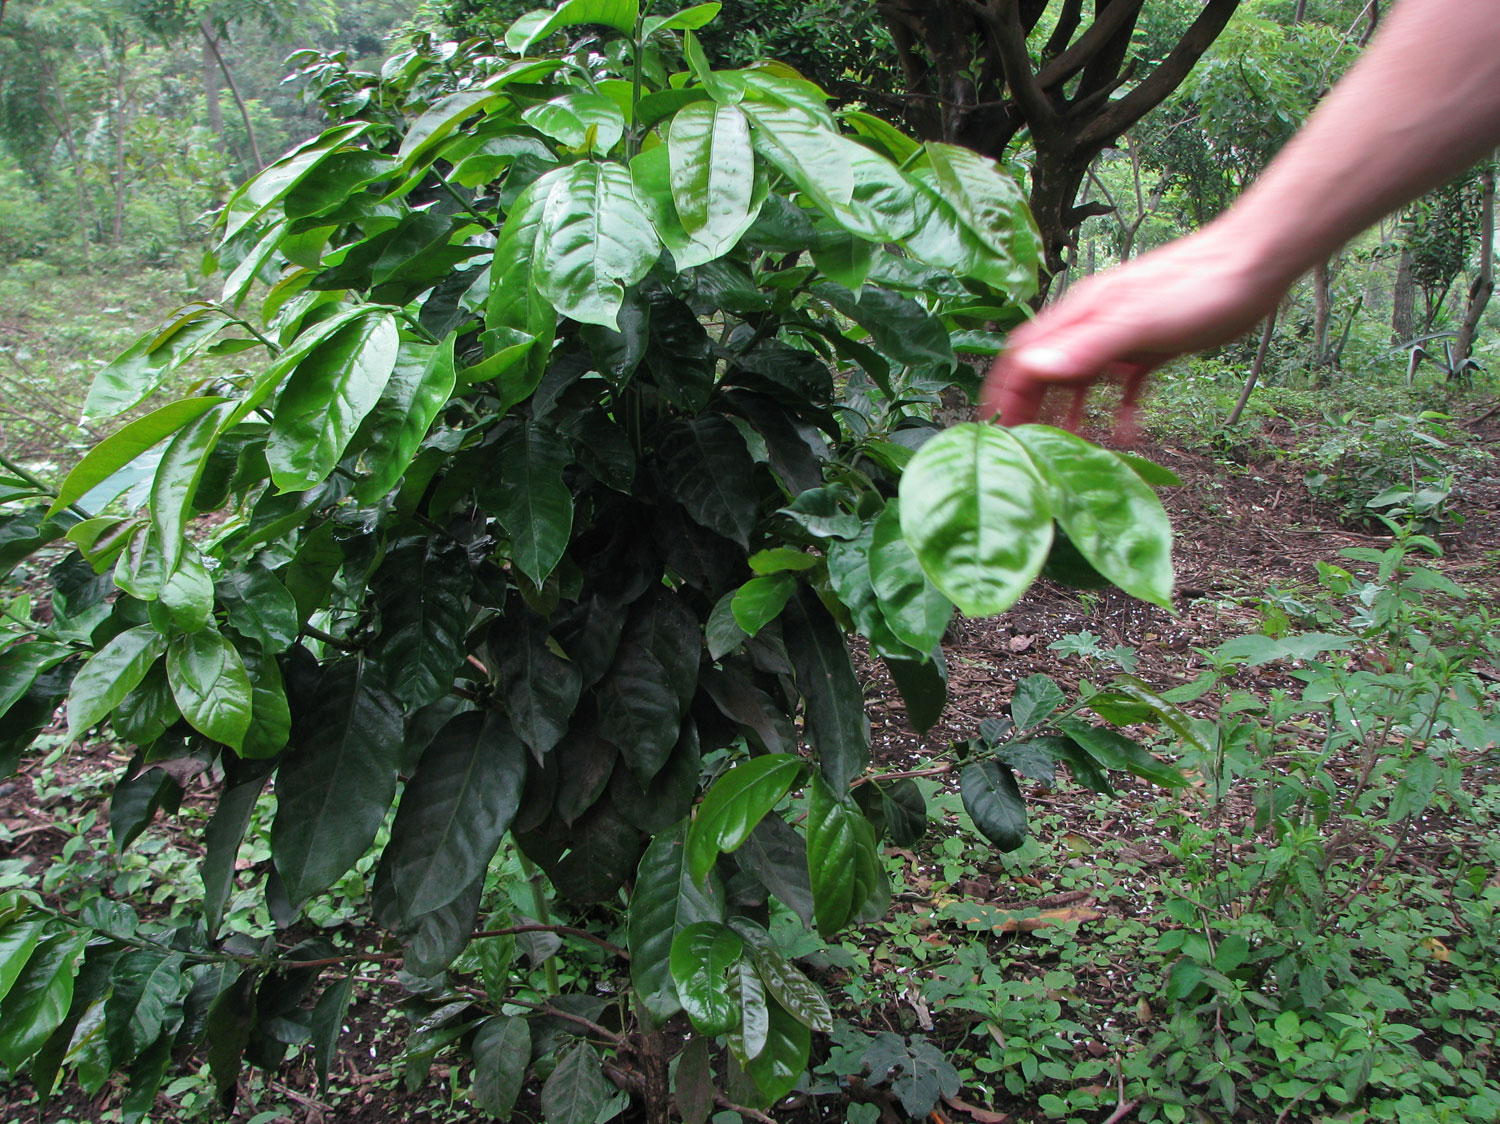 Close-up view of a coffee tree with just the very beginnings of coffee beans